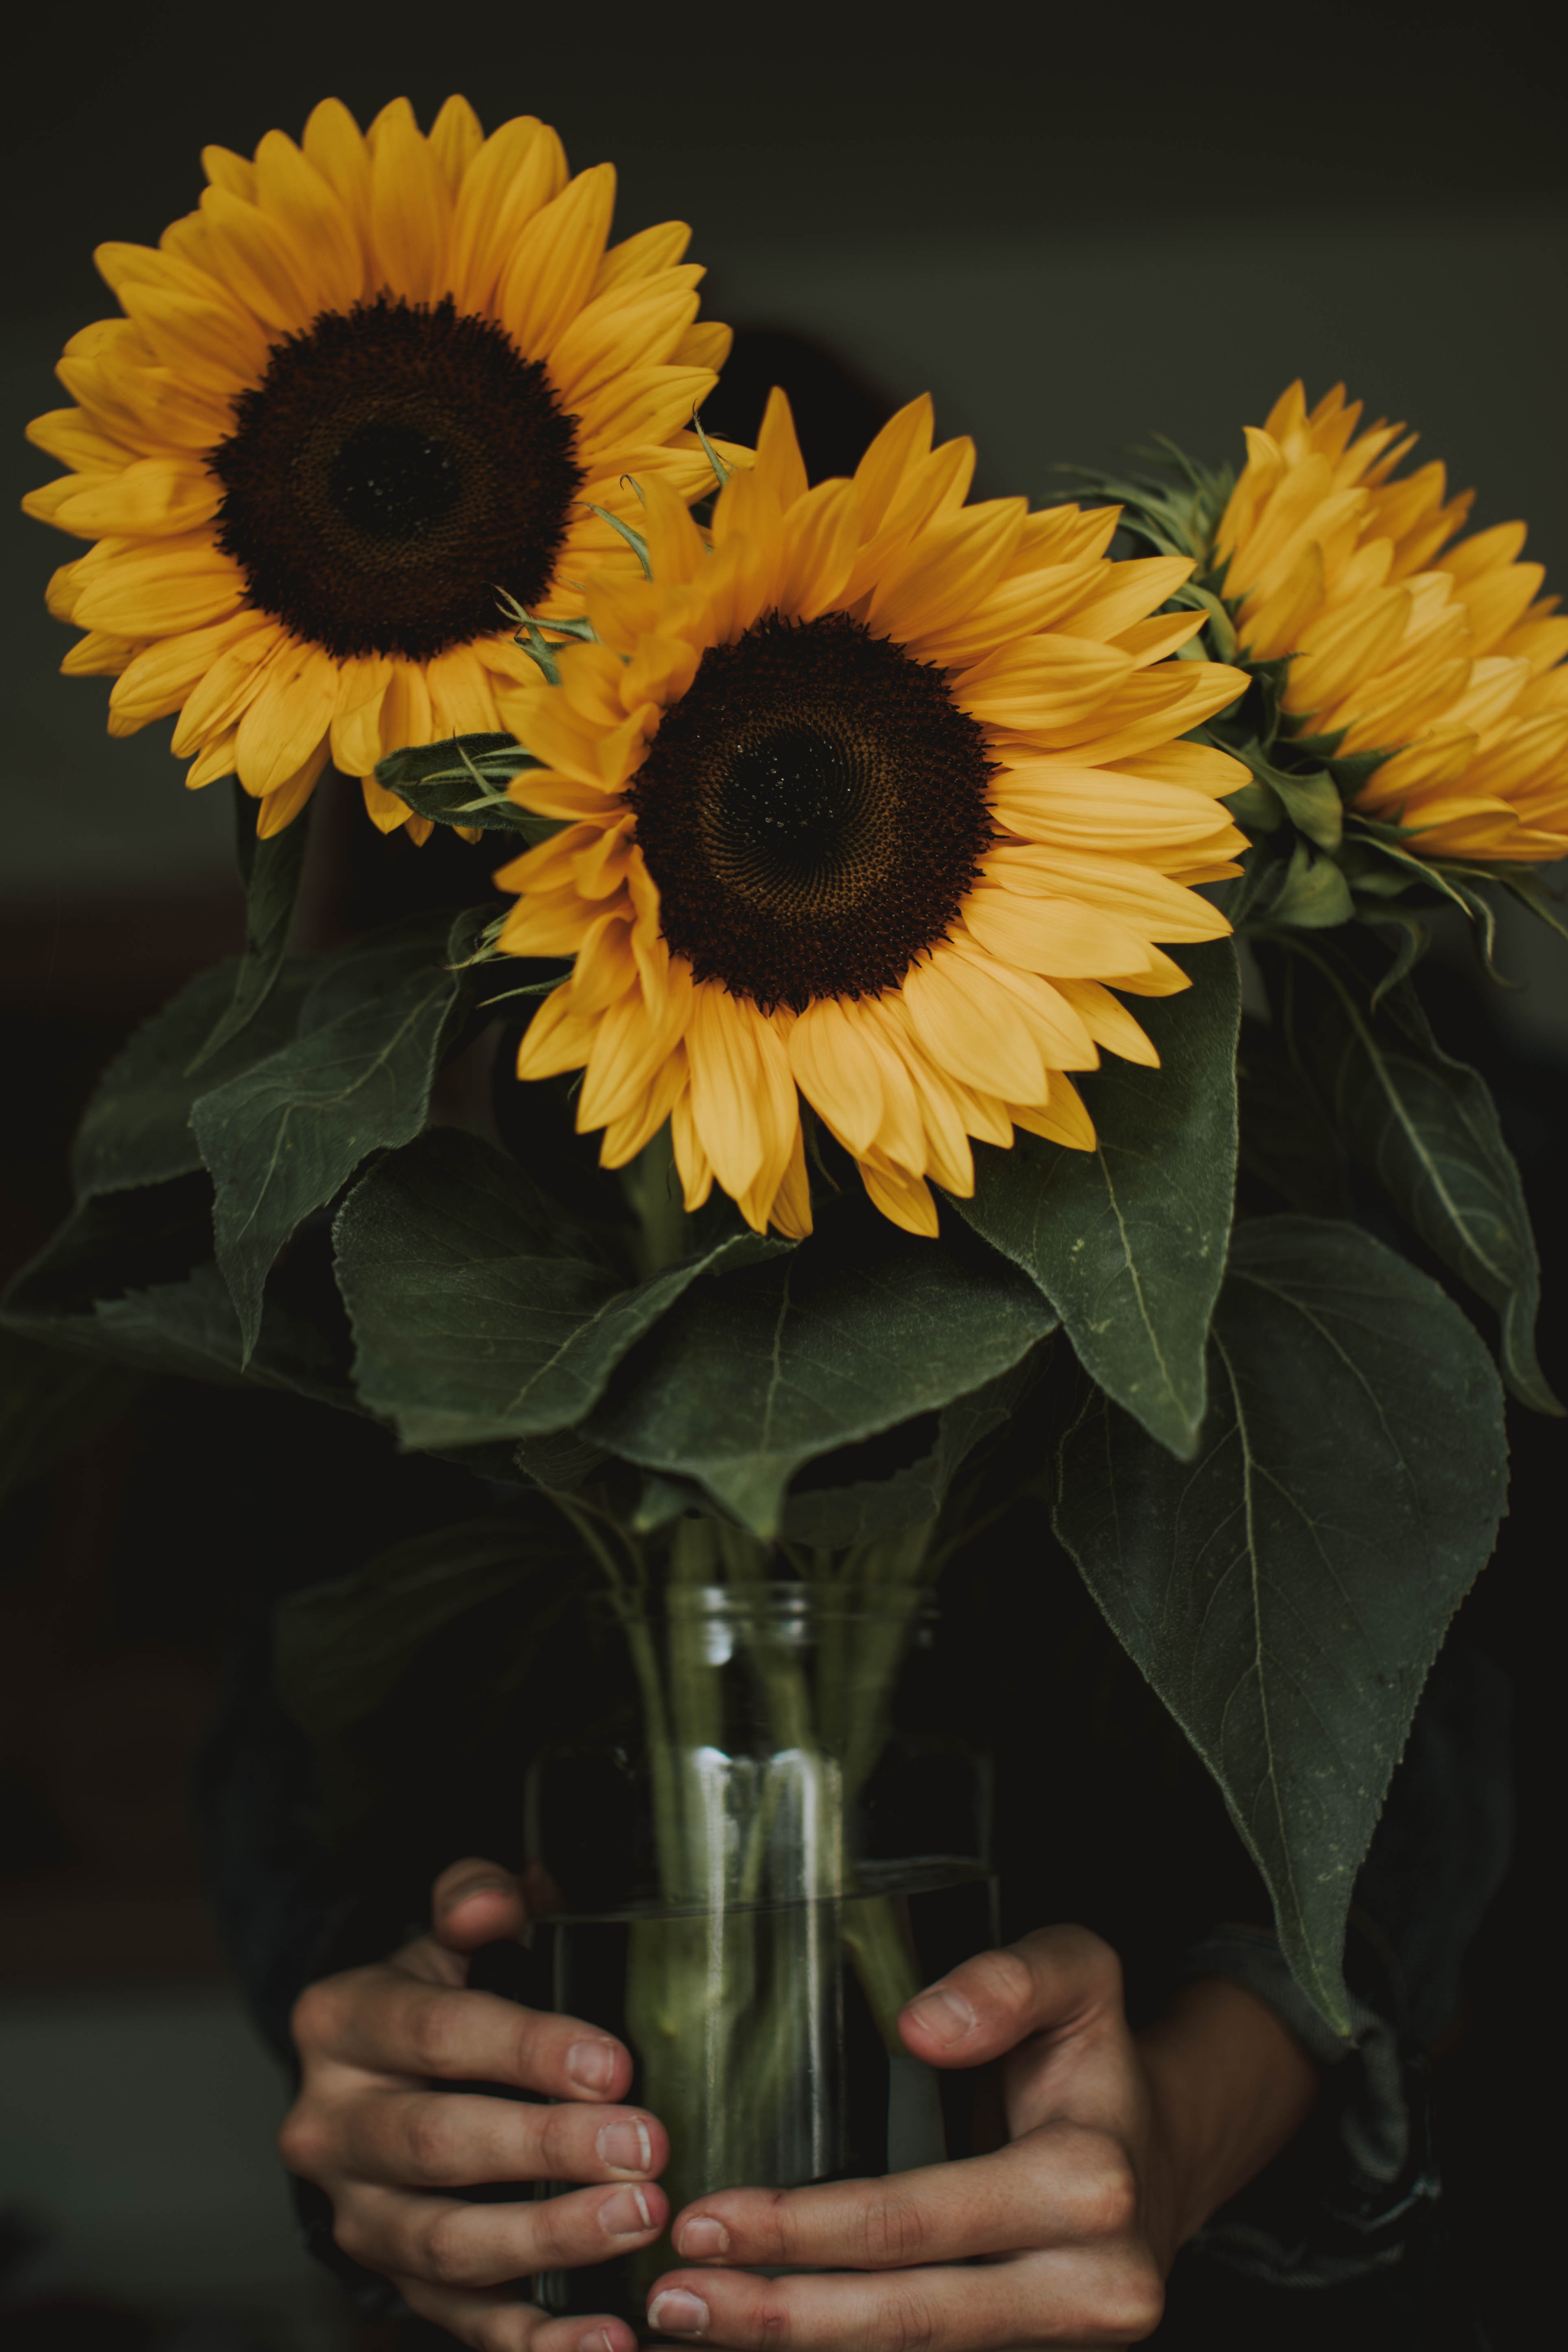 A person holding three common sunflowers in a vase